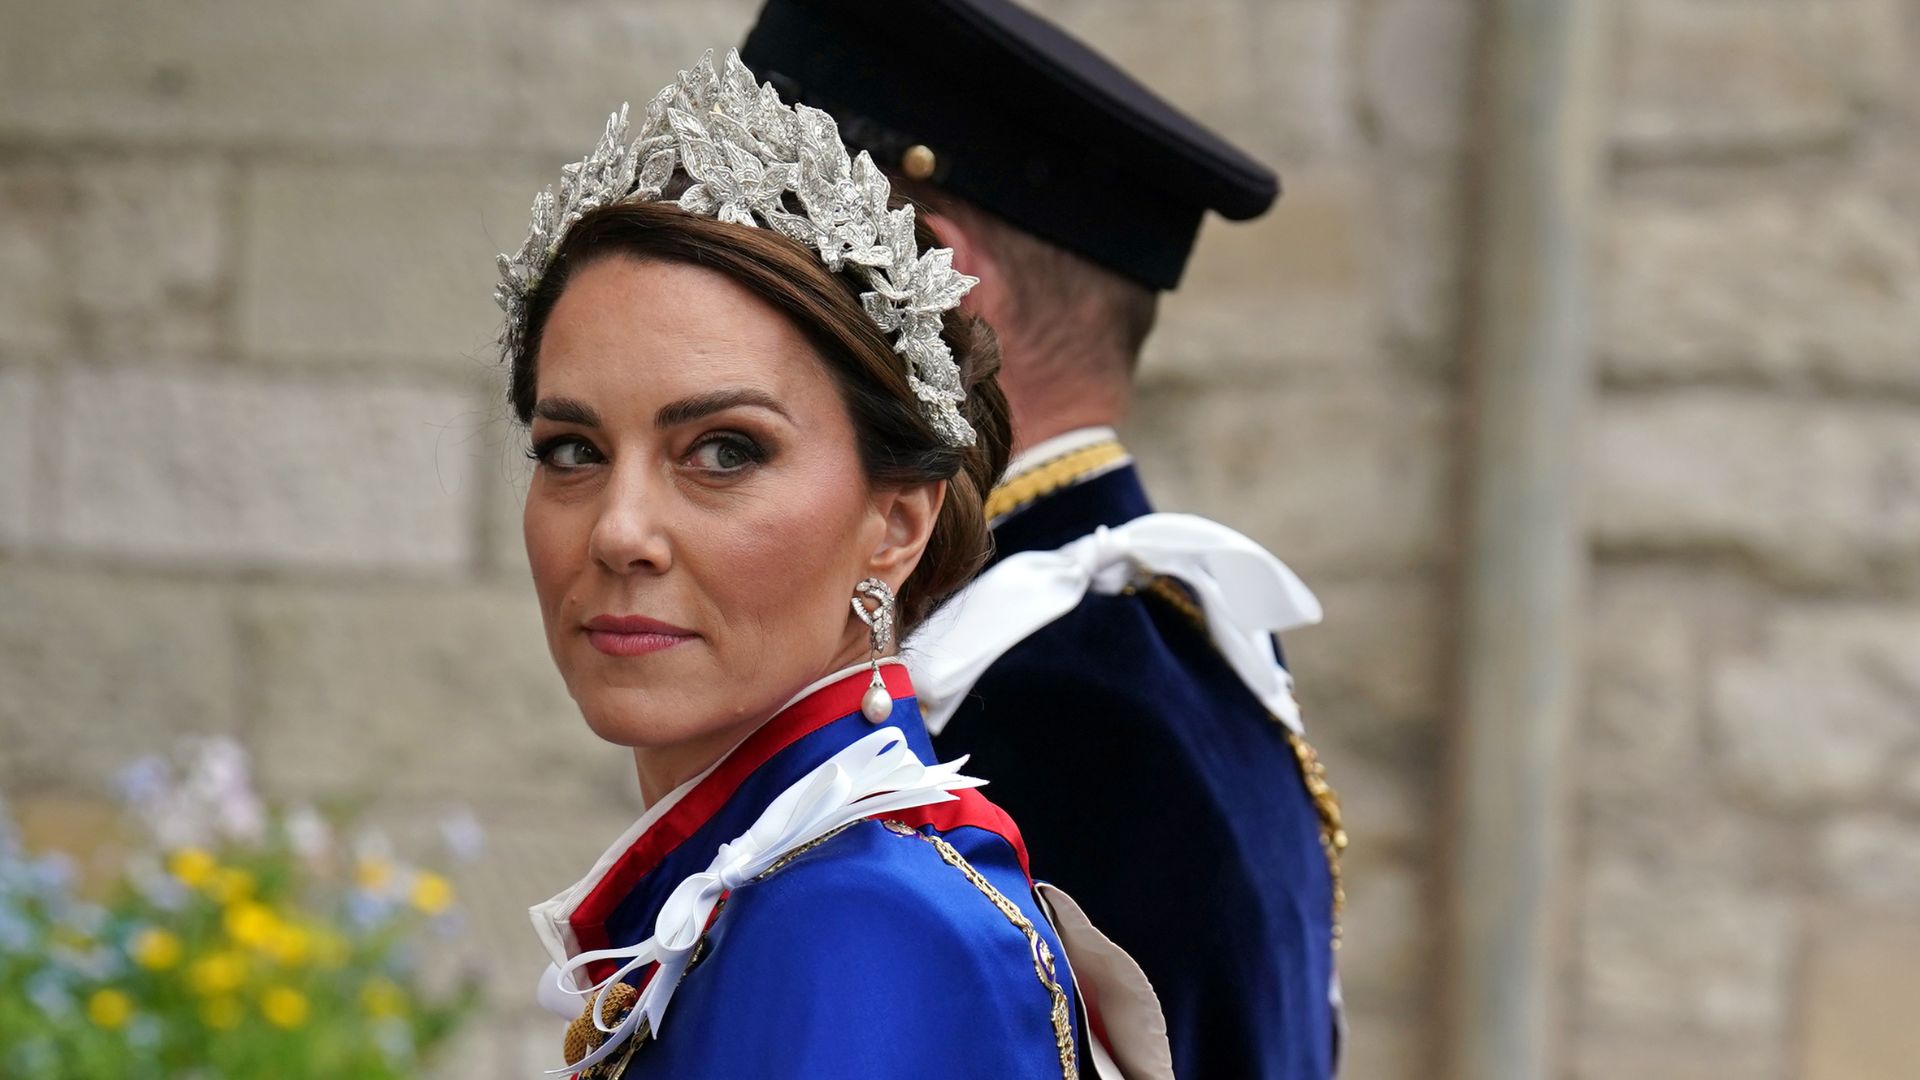 Kate Middleton’s coronation headpiece pays respect to King Charles ...